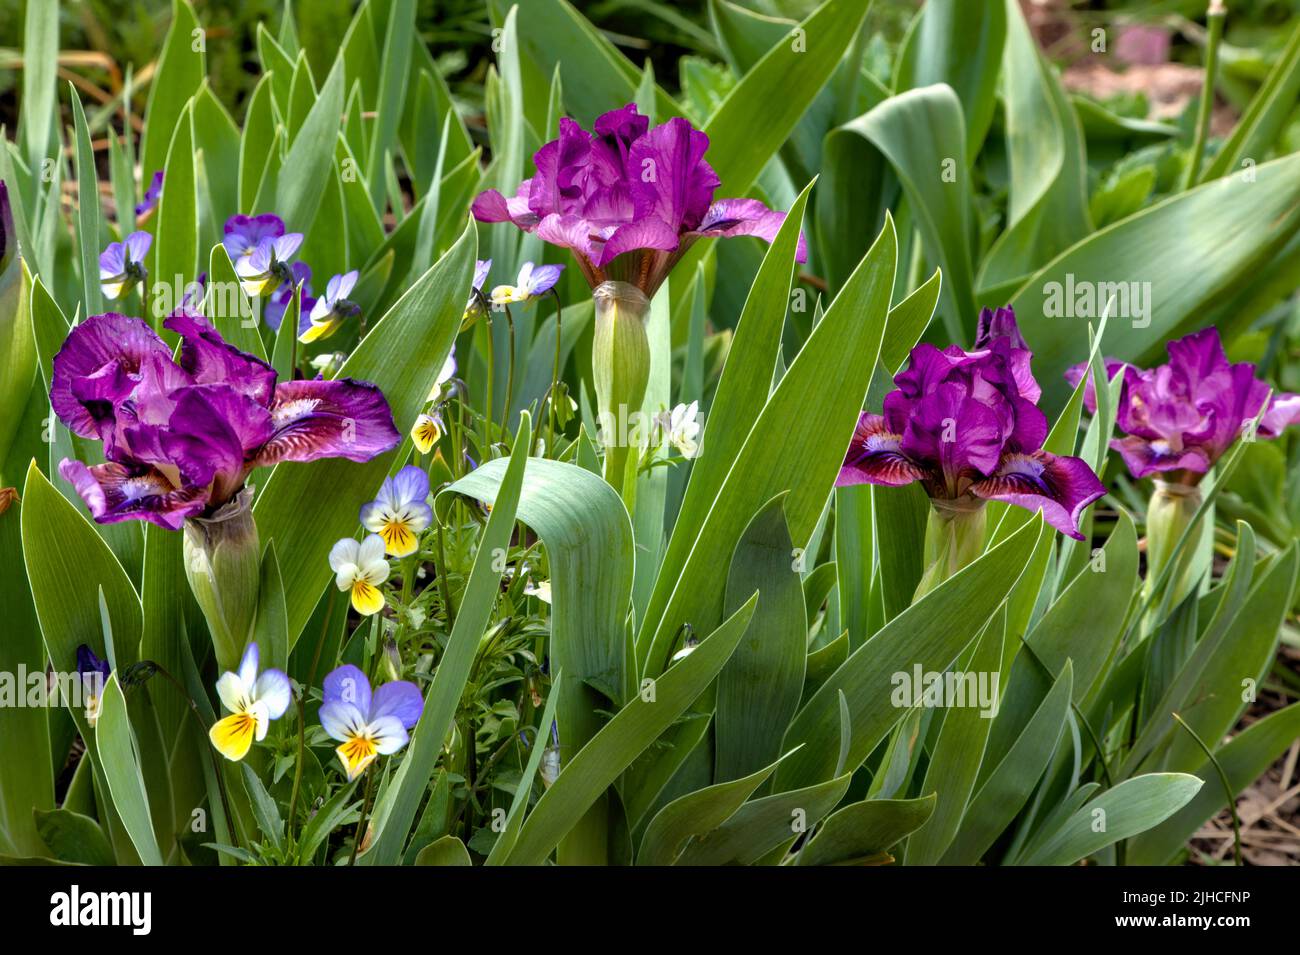 Johnny Jump Ups have invaded the space of a patch of purple flowering Miniature Iris. Stock Photo